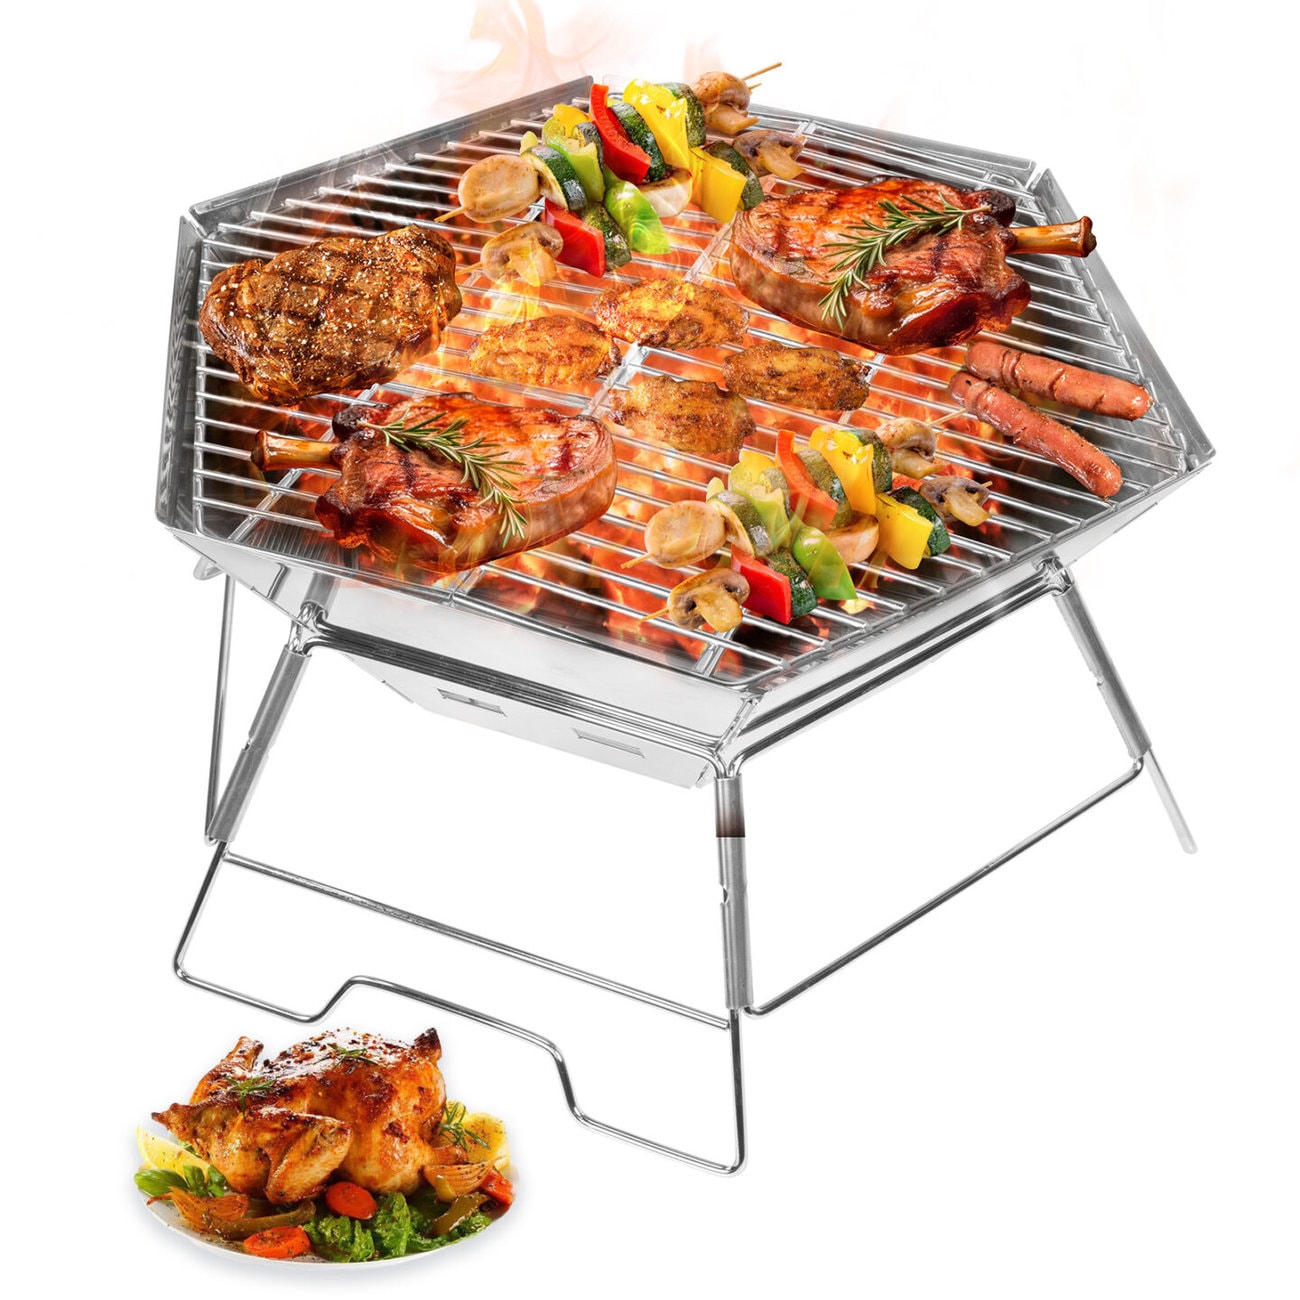 Walmart funnel shaped grill with excellent wind resistance